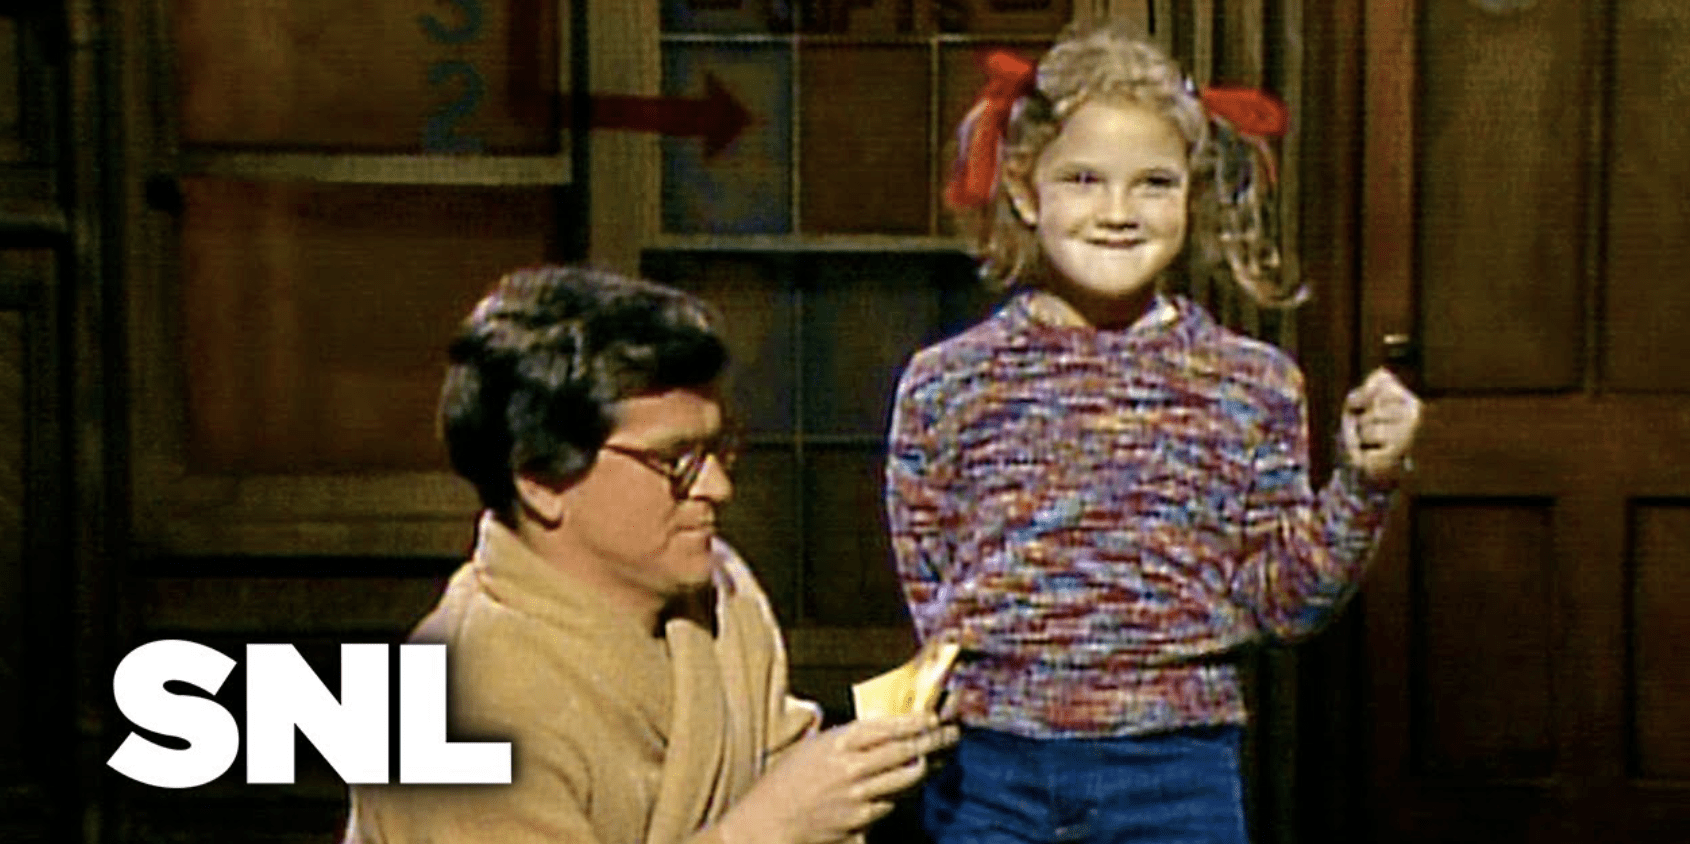 Drew Barrymore on SNL from NBC